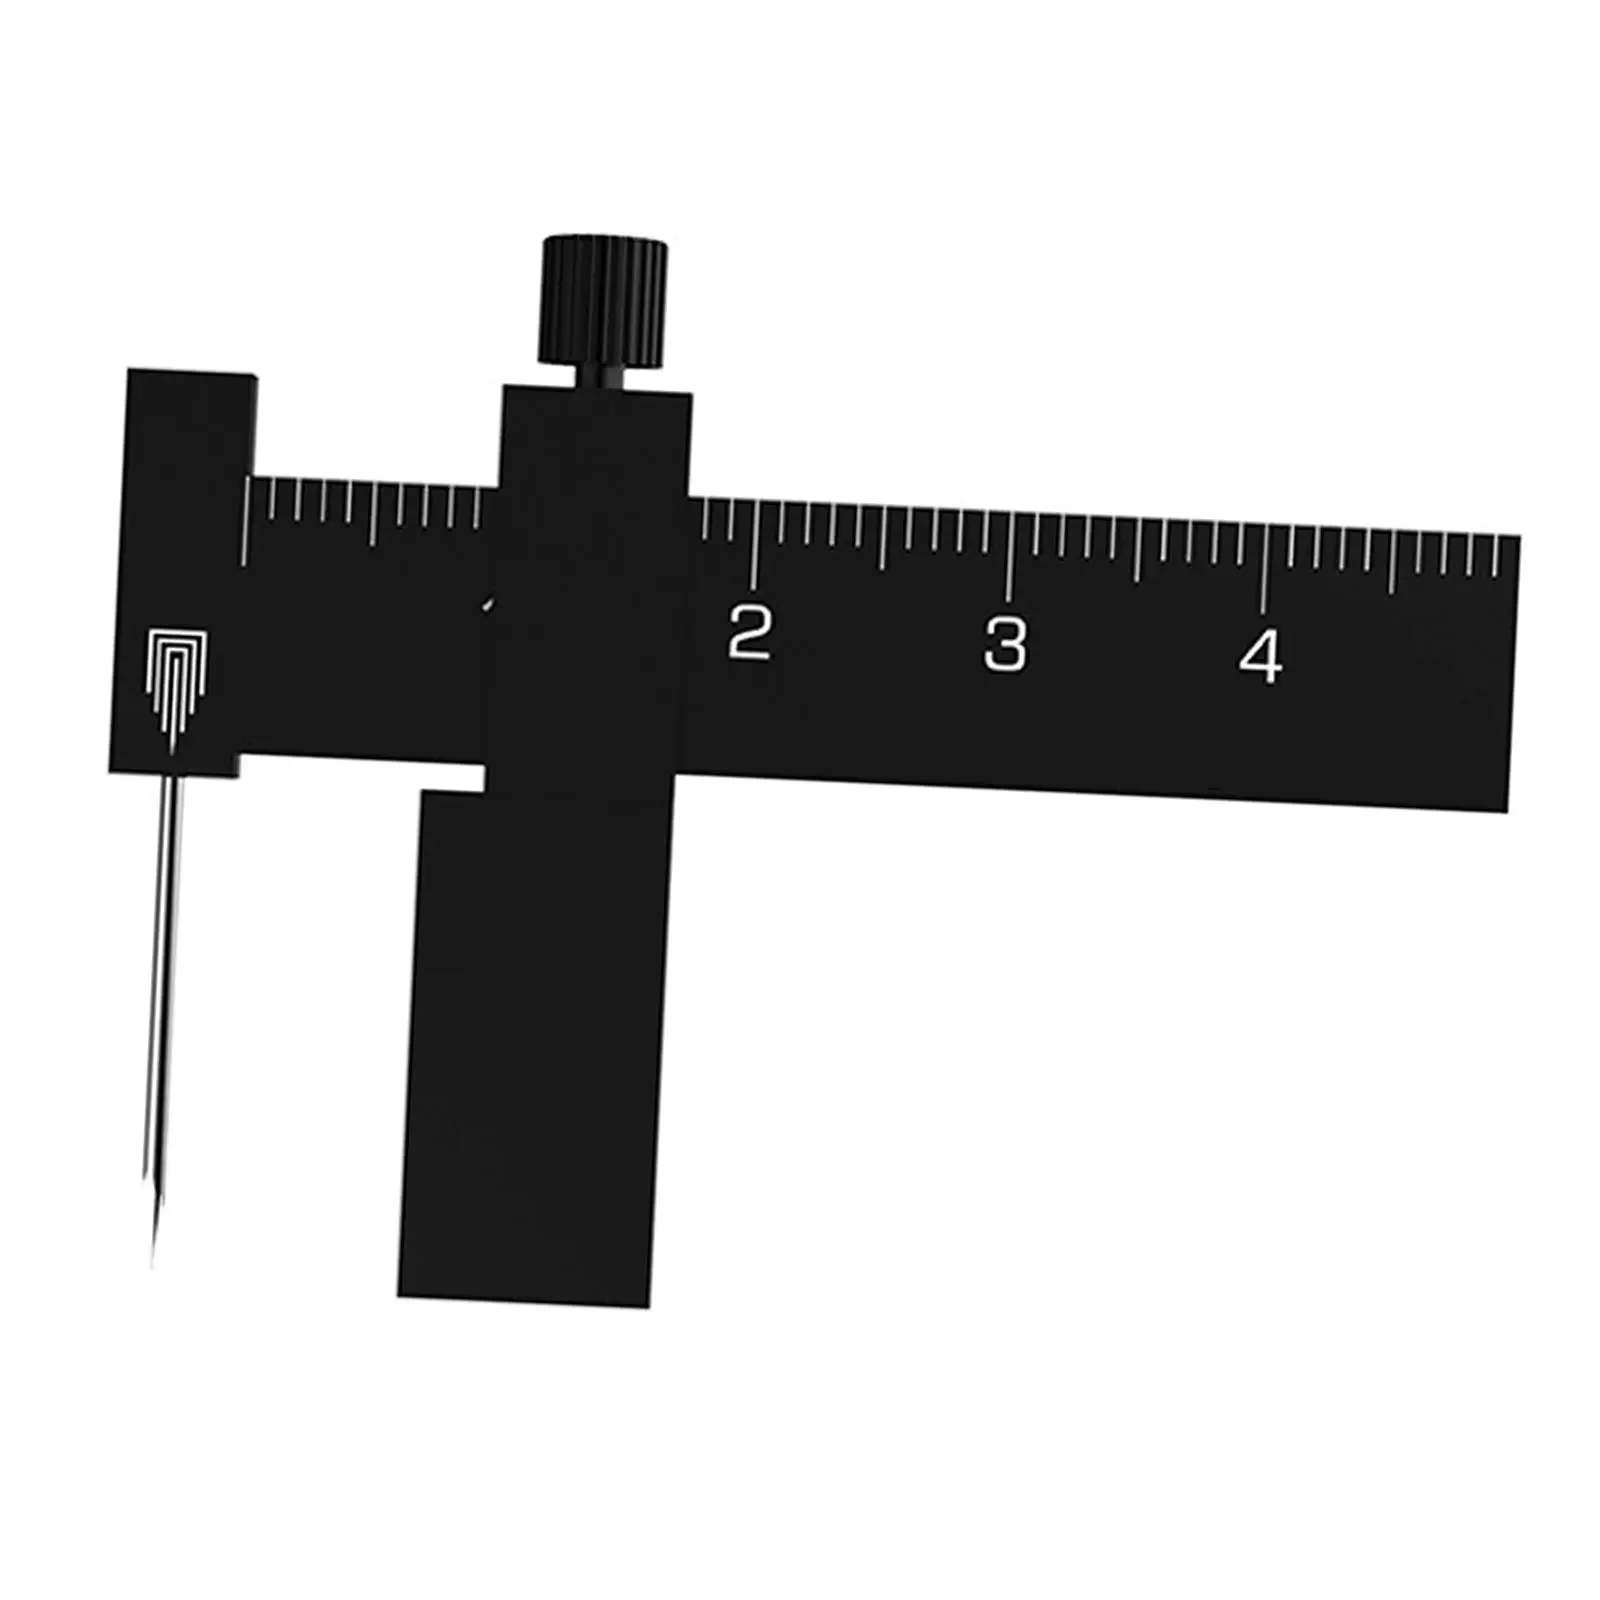 Equidistant Parallel Scriber for Miniature Scale Model Hobby, Machinists, Technicians Or Craftsmen